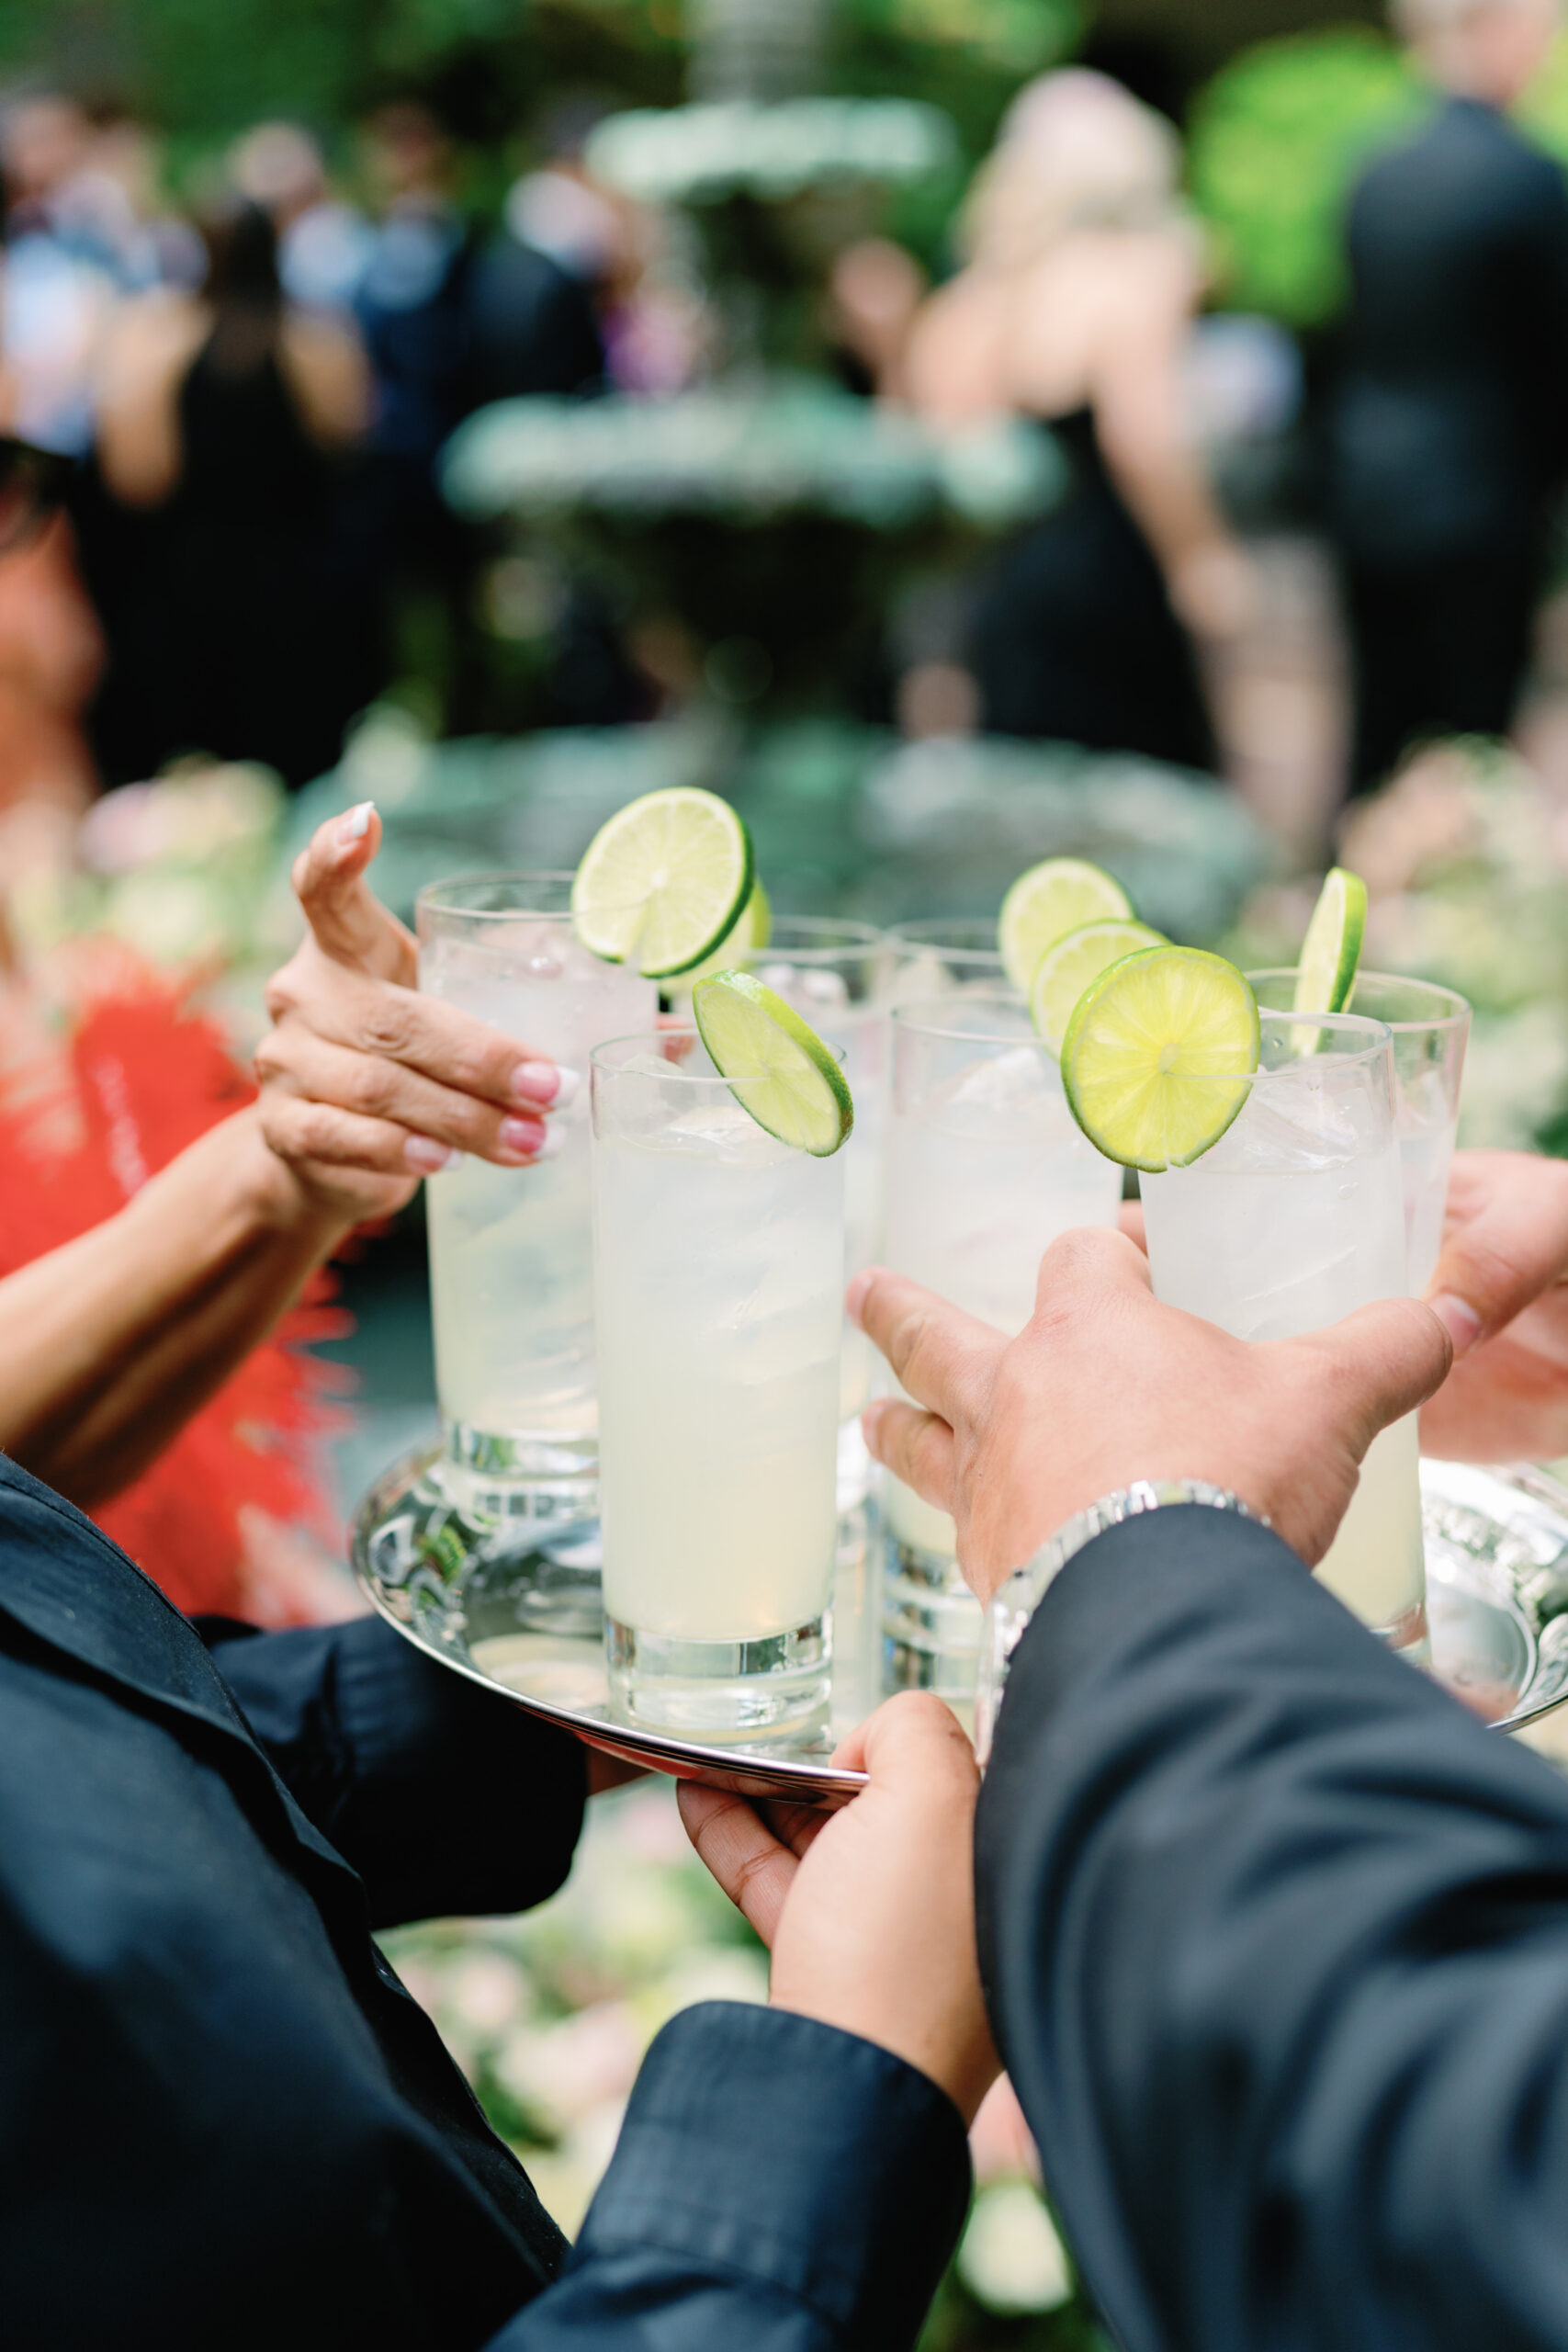 Wedding guests grab cocktails with lime garnish off of tray at spring cocktail hour. Charleston destination wedding.